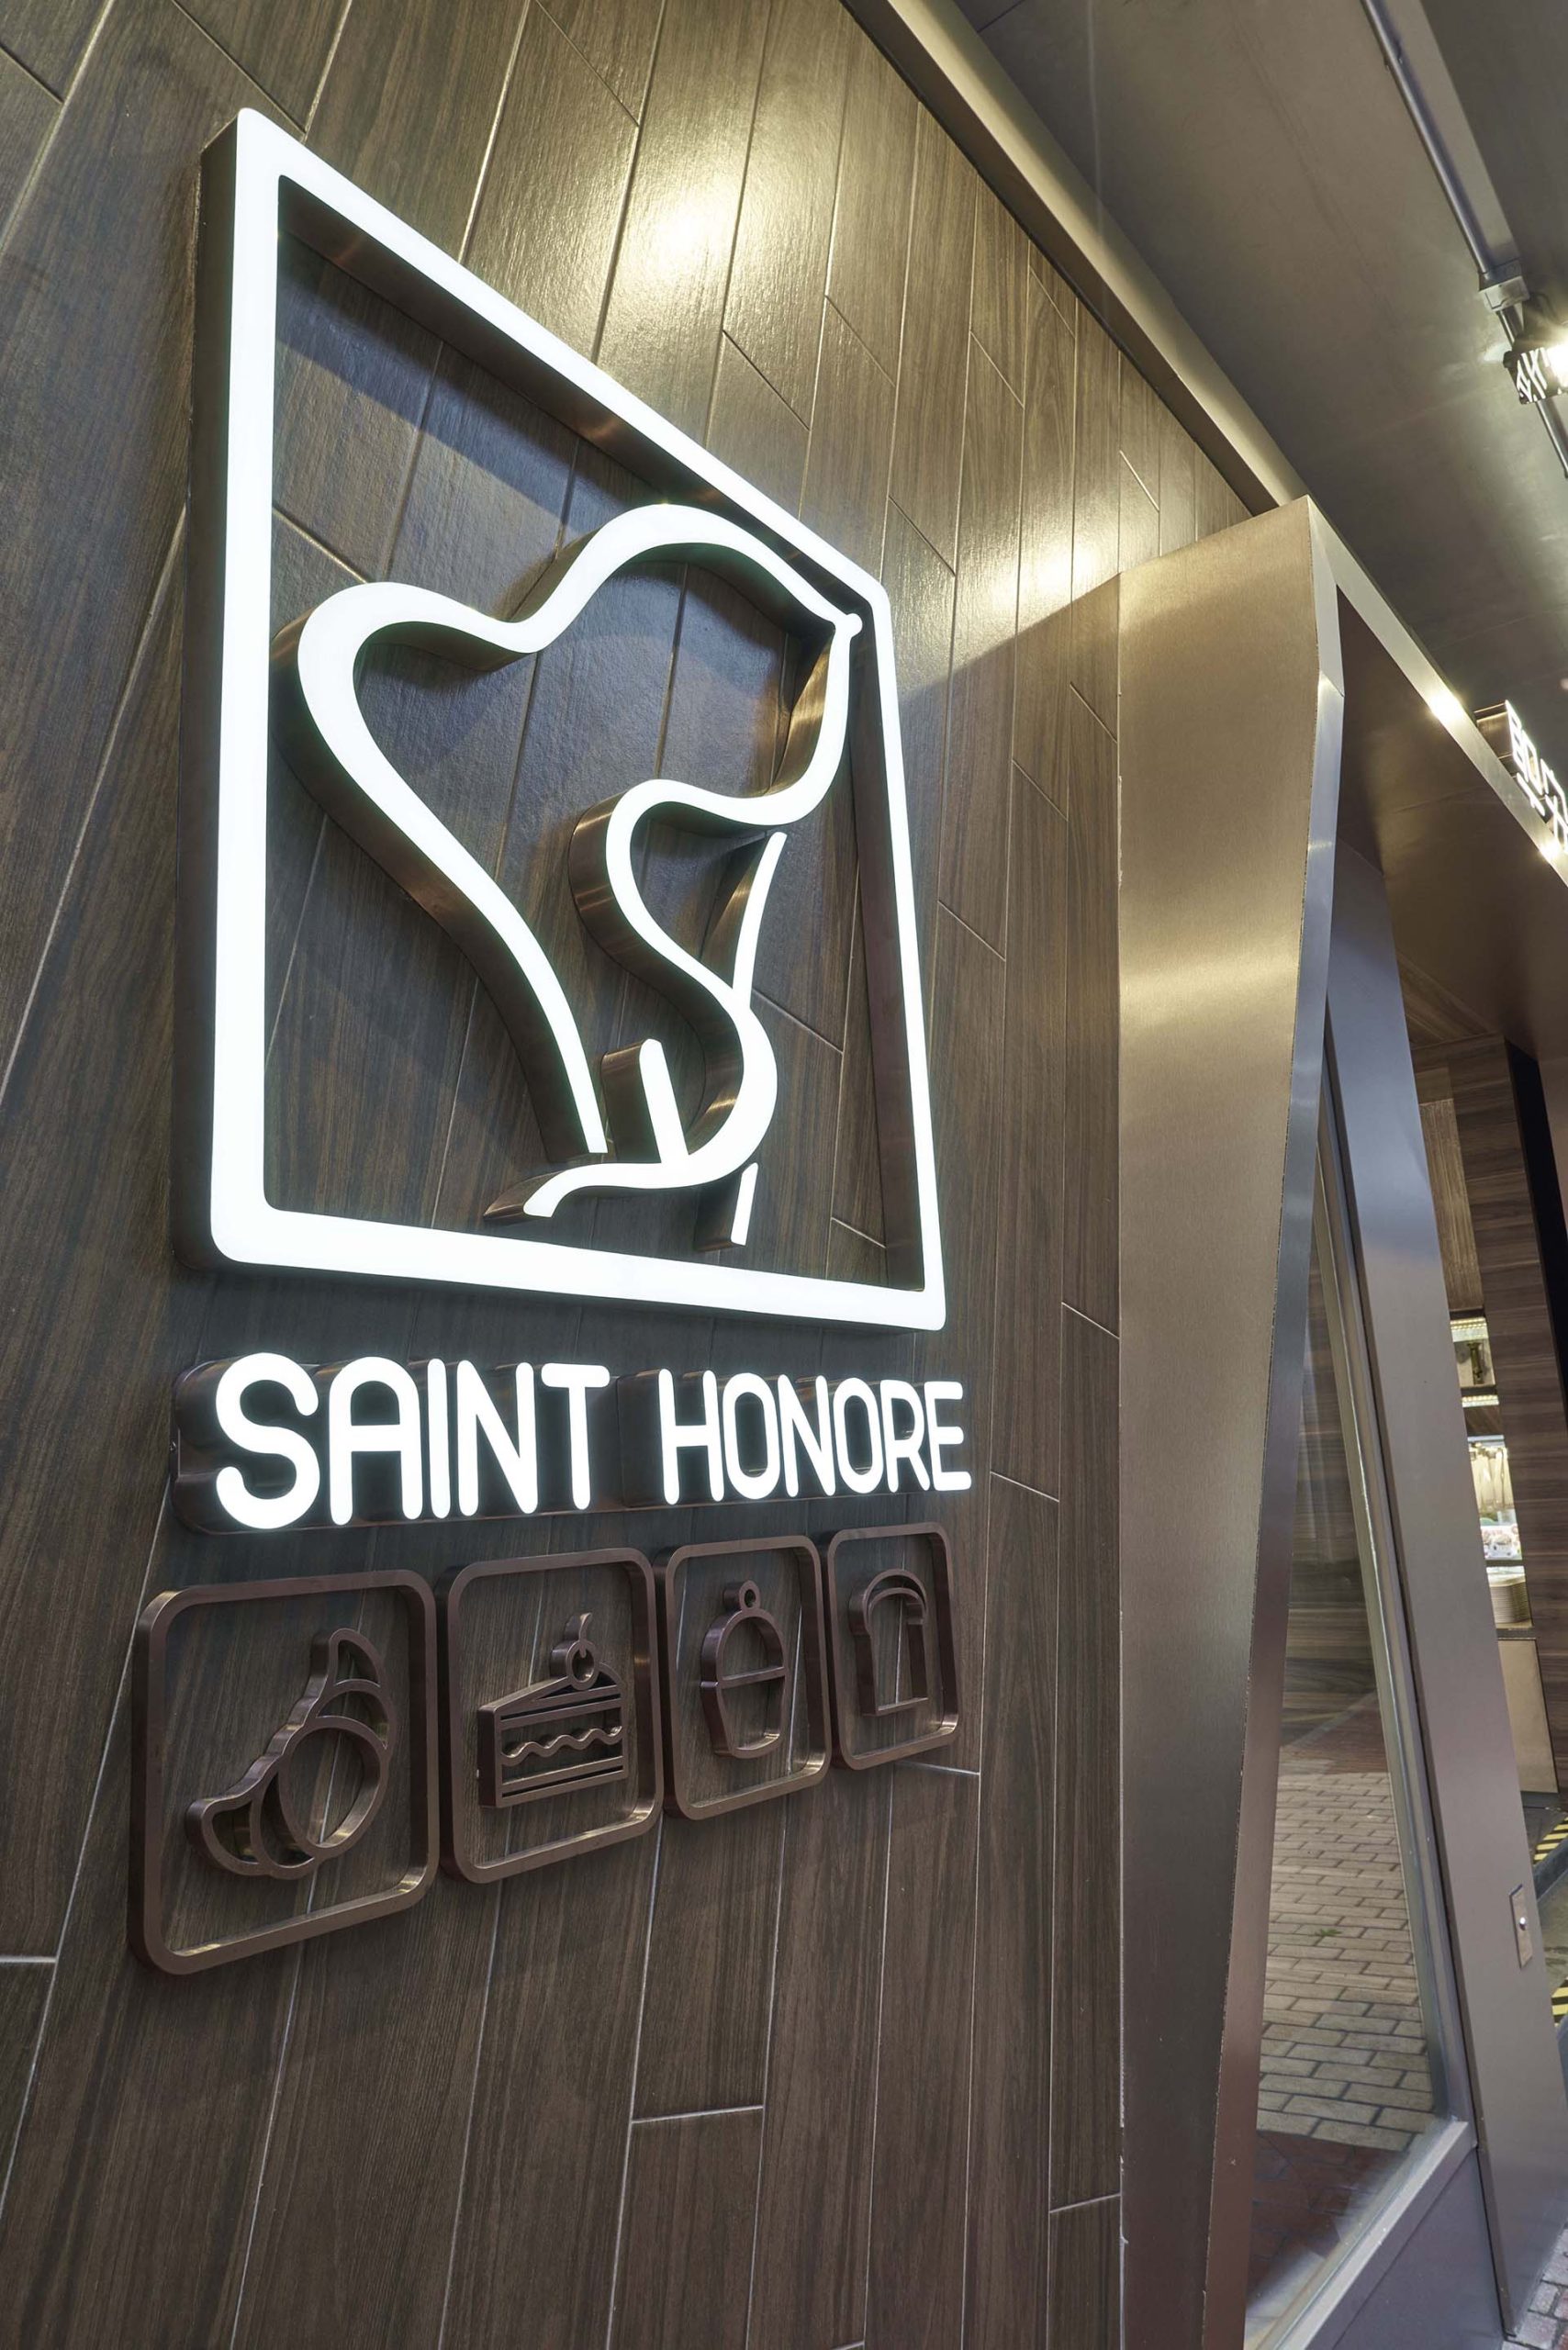 Saint Honore Cake Shop Lan Fong Road Hong Kong Store Interior Design and Styling by Plaap Design